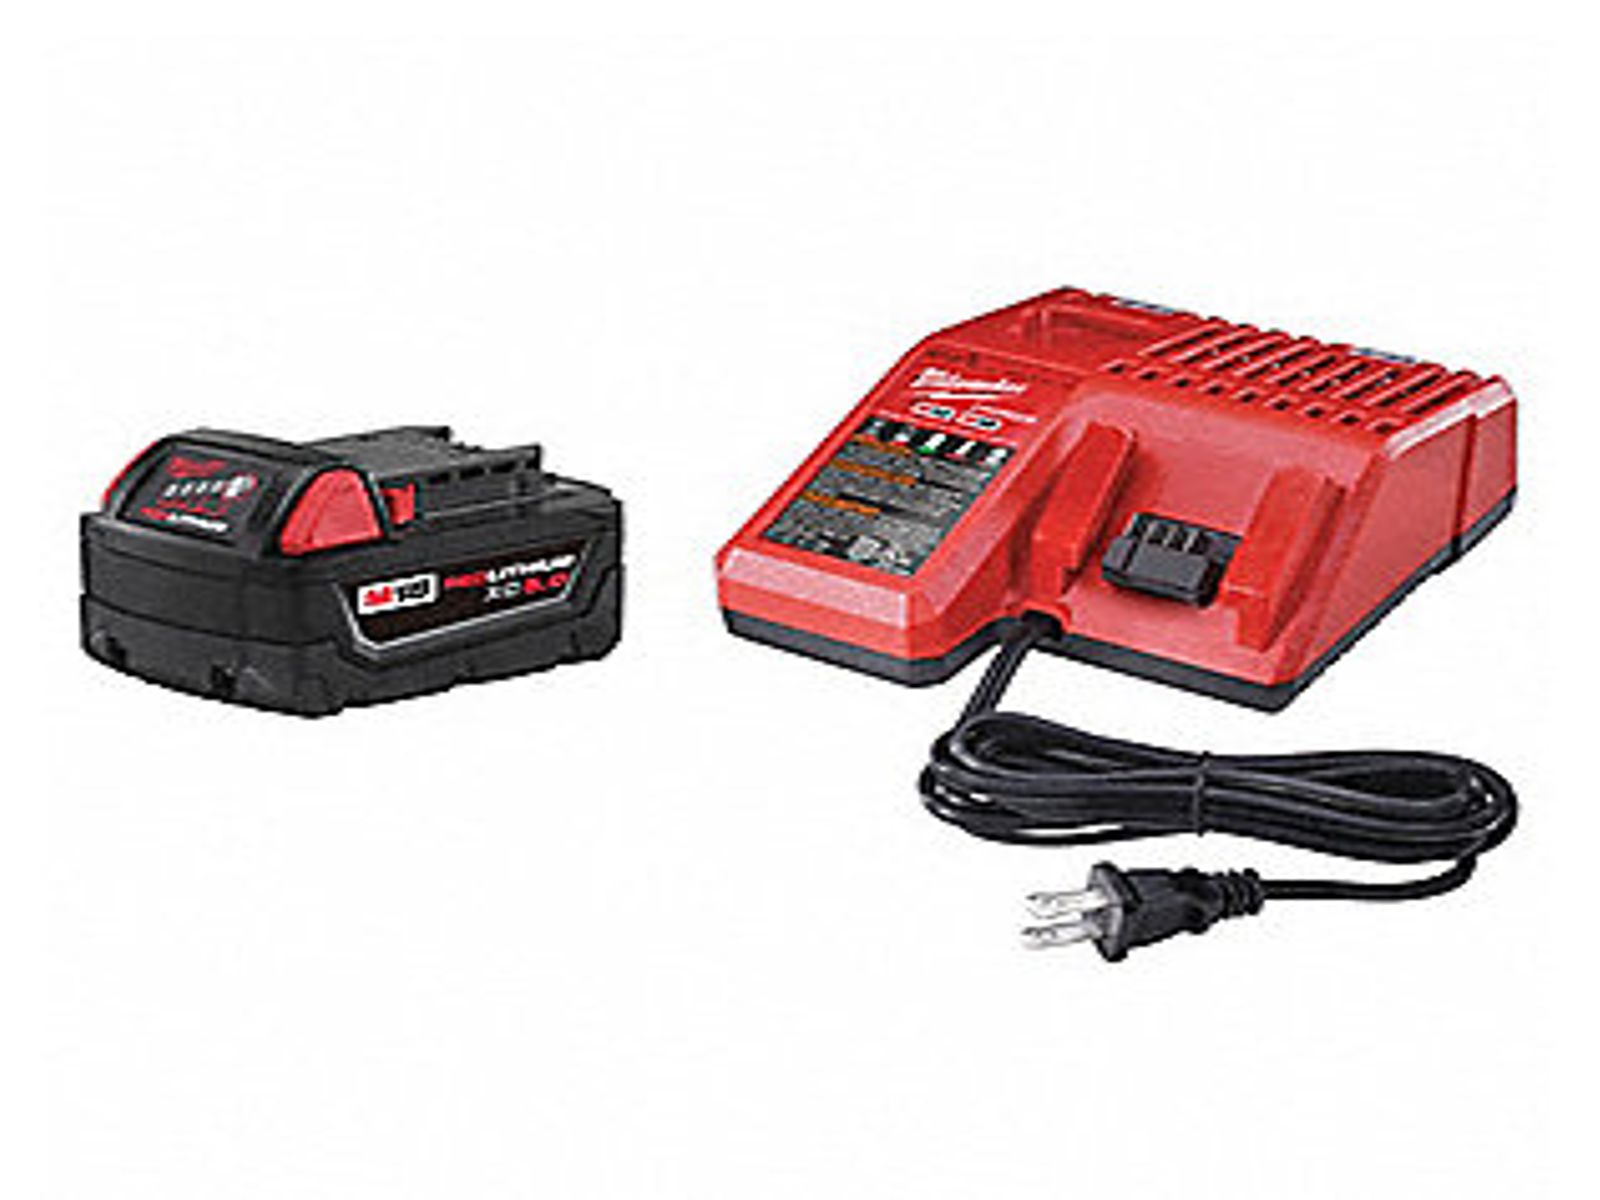 BATTERY CHARGER FOR P328/P329 STRAPPING TOOL 18V 5.0 AH